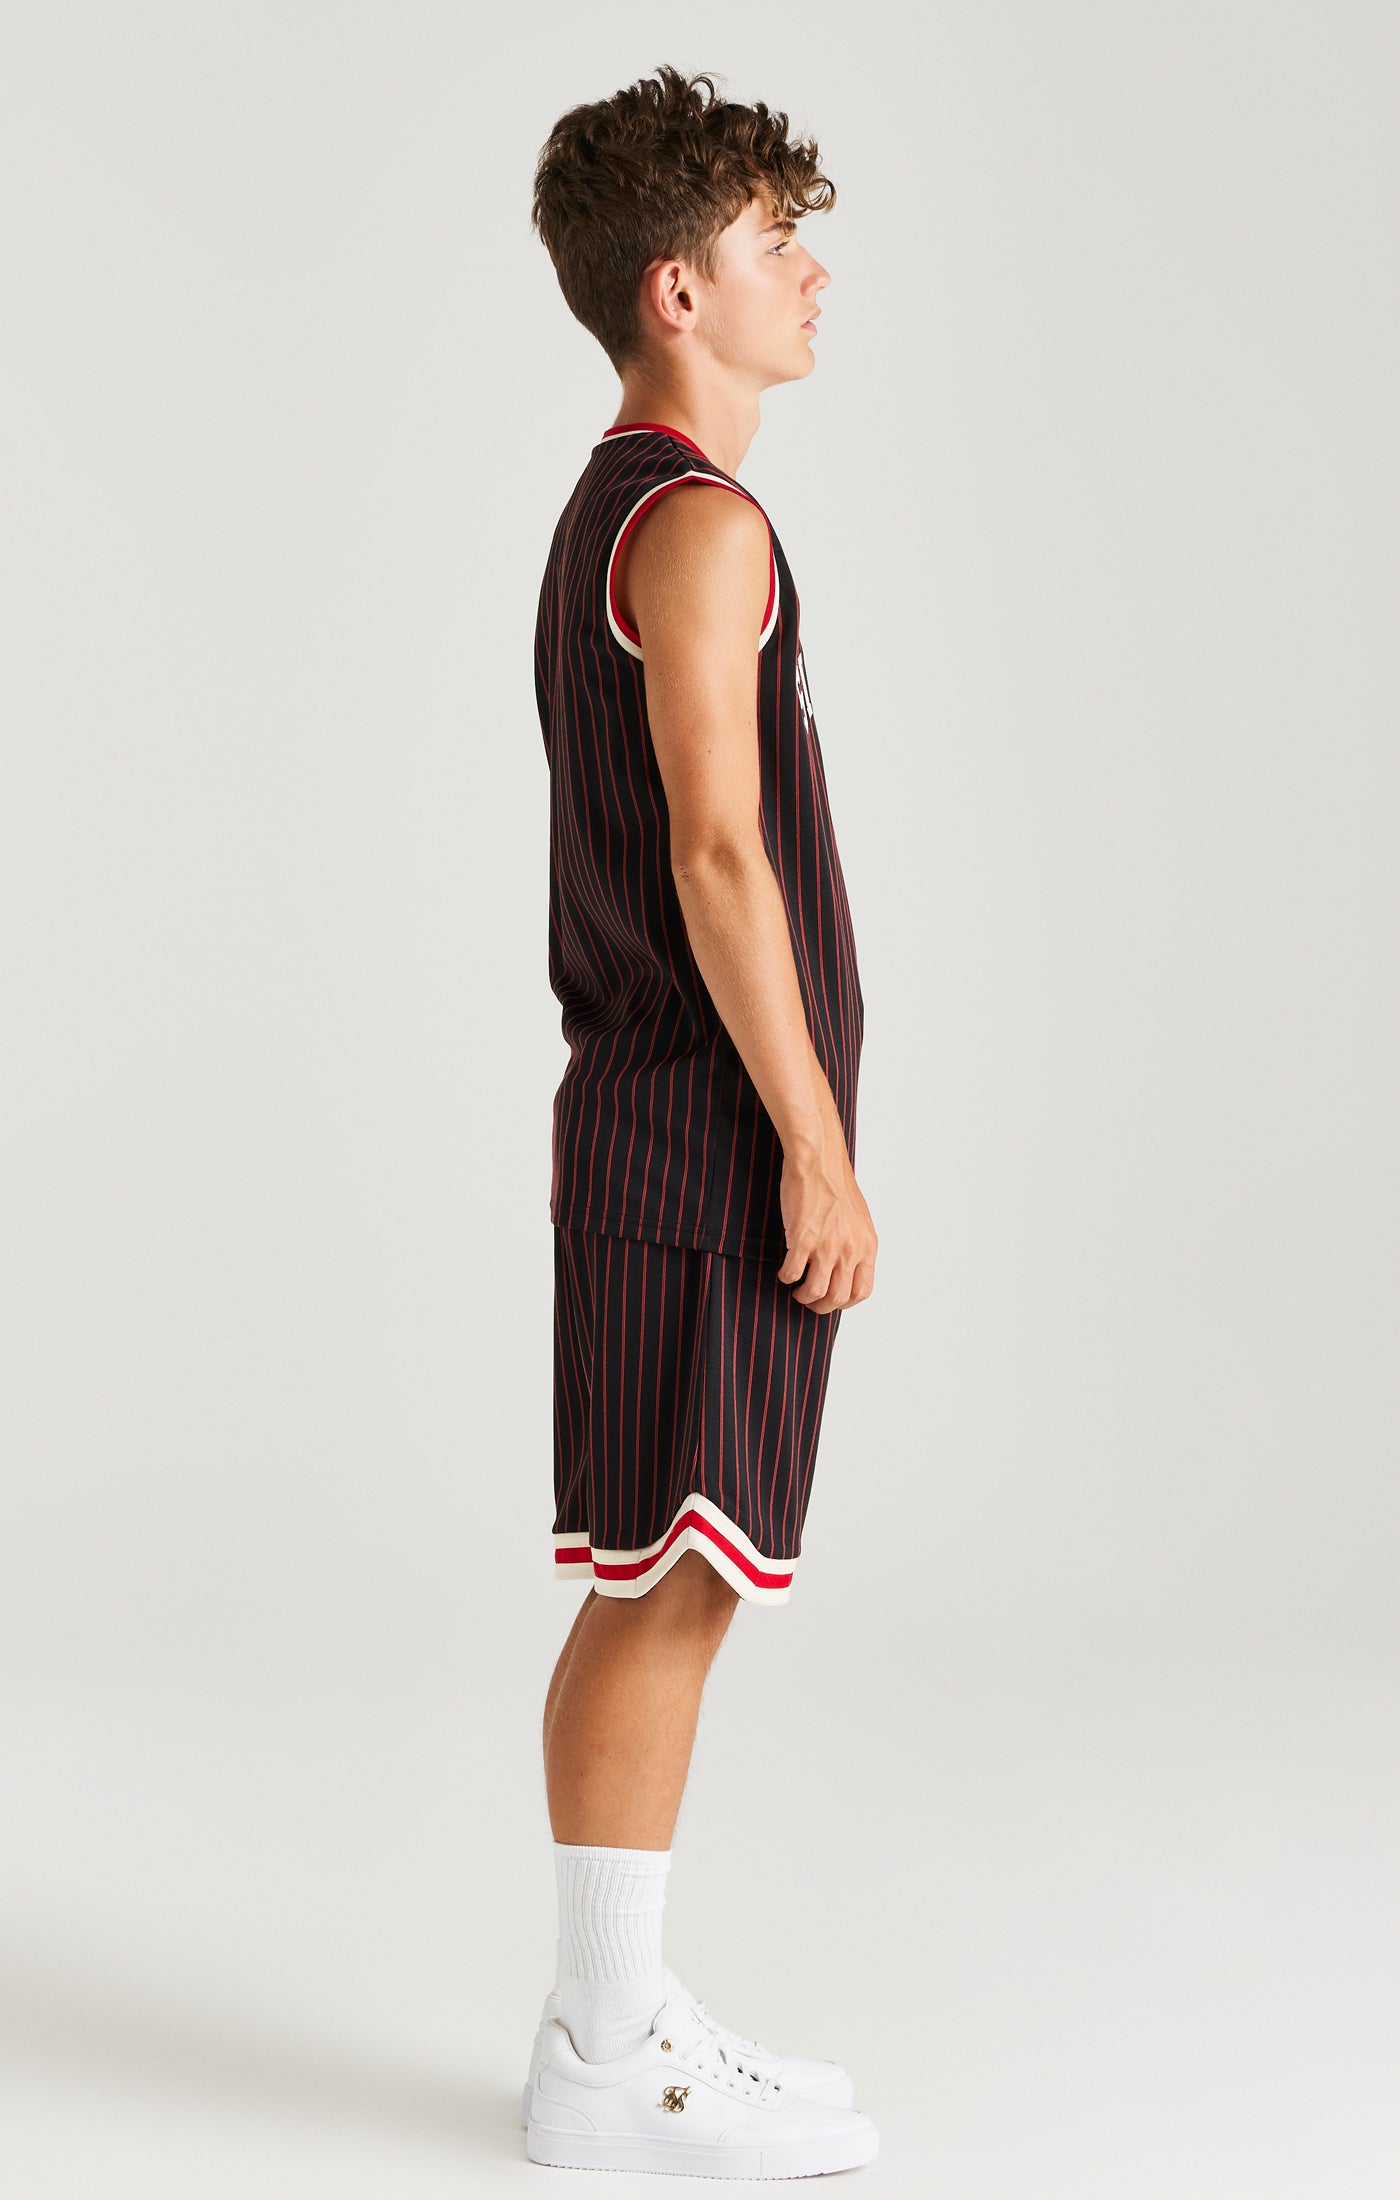 Load image into Gallery viewer, SikSilk Retro Classic Basketball Vest - Black (3)